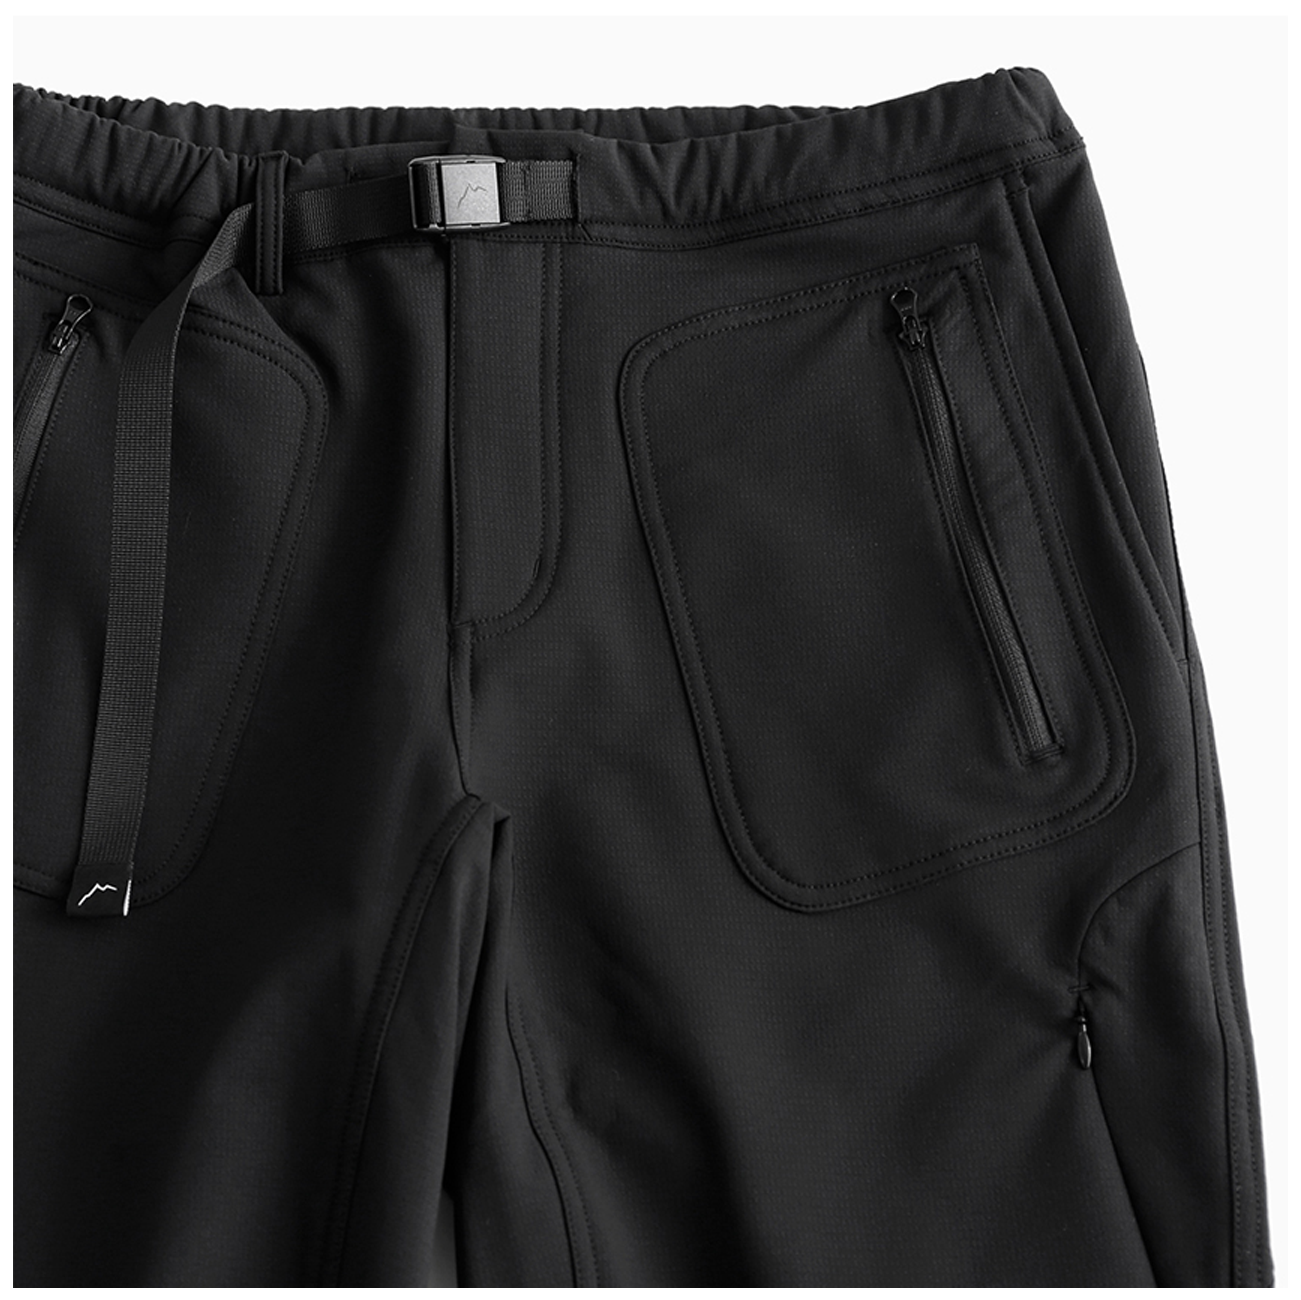 CAYL Thermo Hiking Pants- black